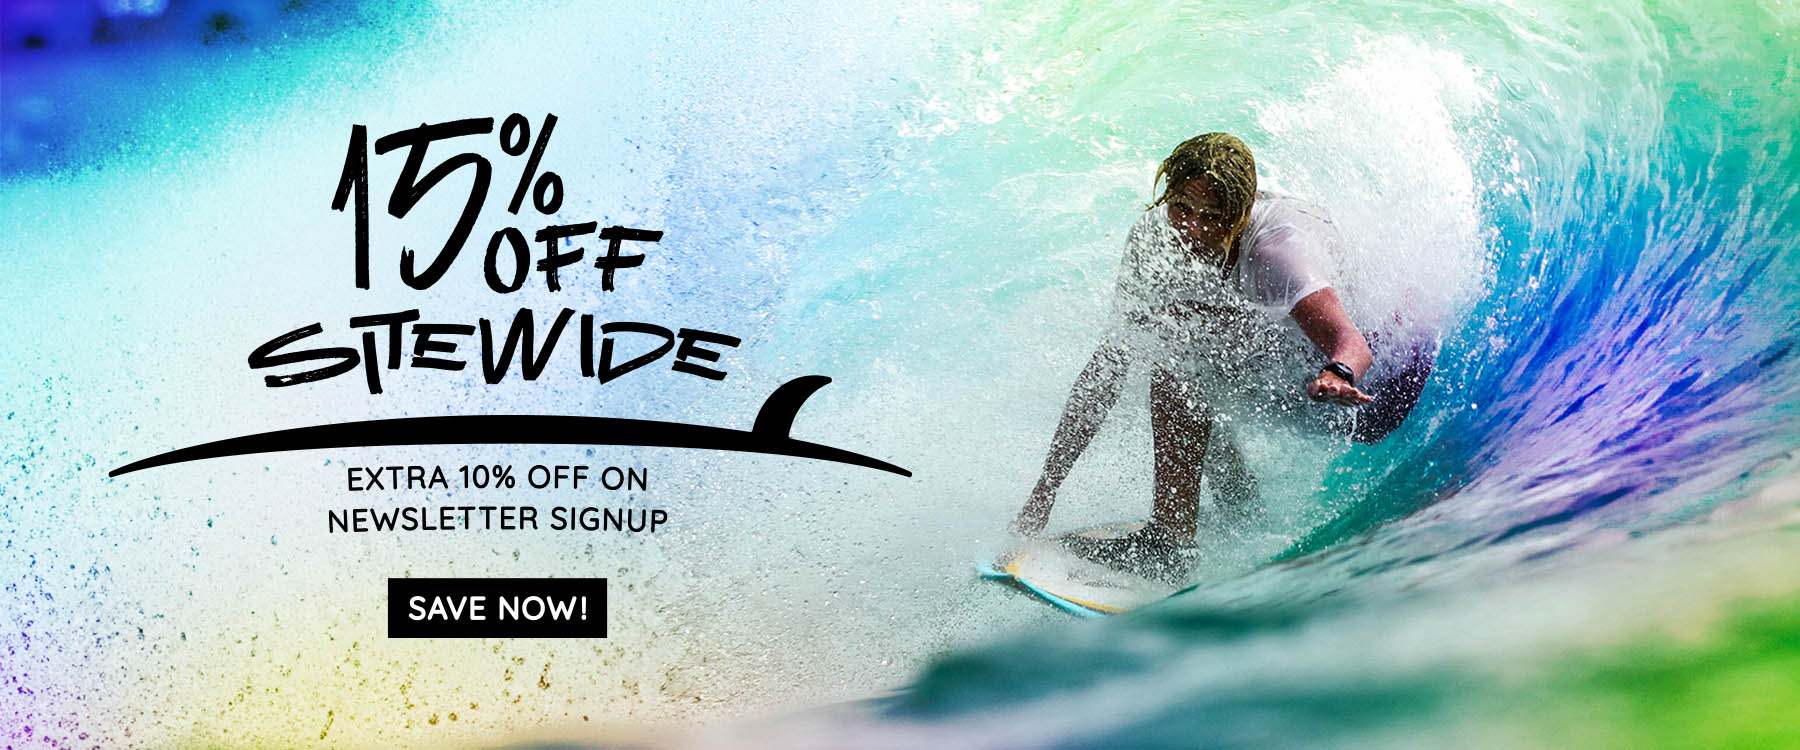 Heysurf 15% Off Sitewide and extra 10% at newsletter sign-up